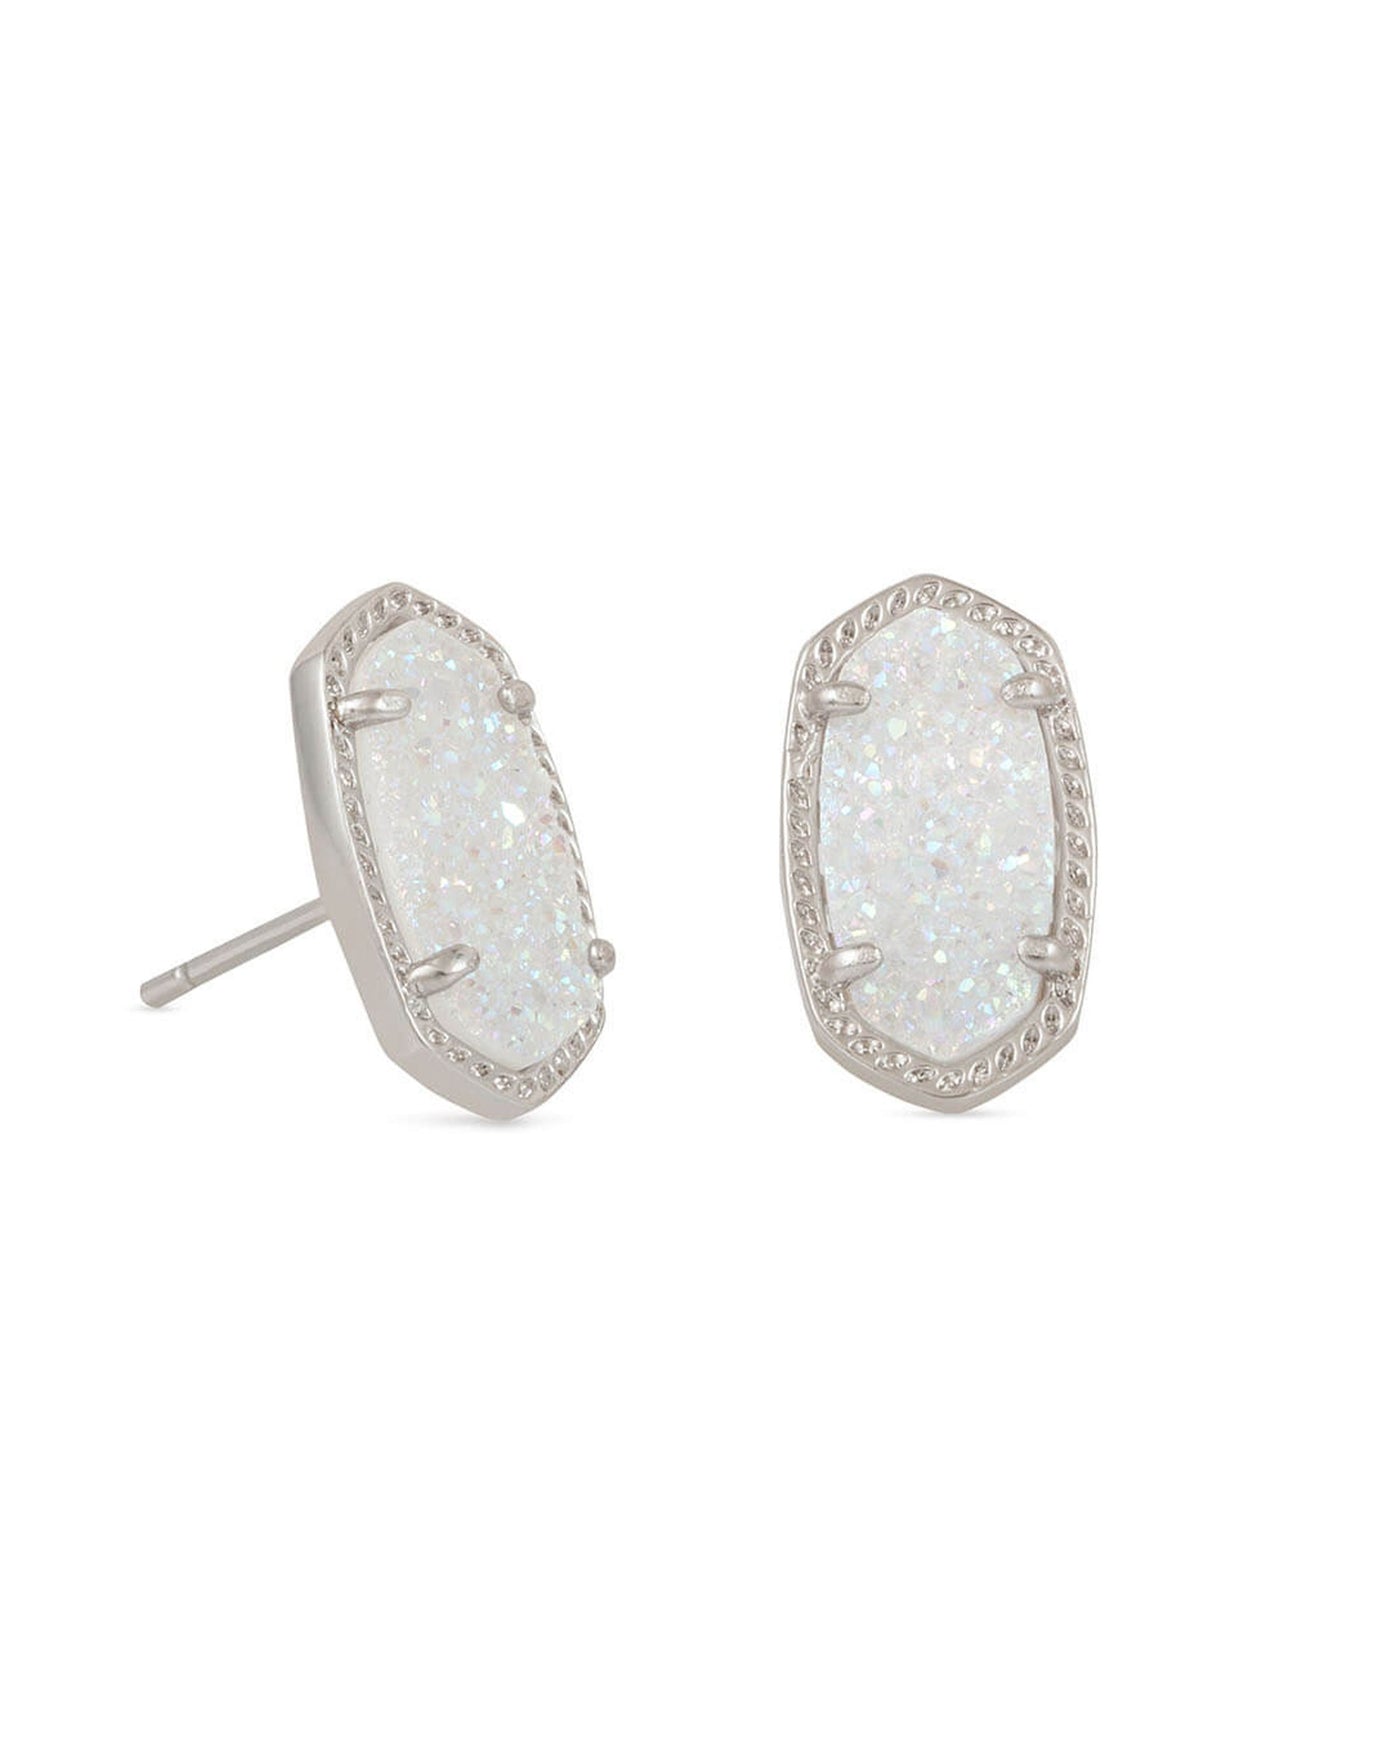 Ellie Stud Earrings Silver iridescent Drusy on white background, front view.